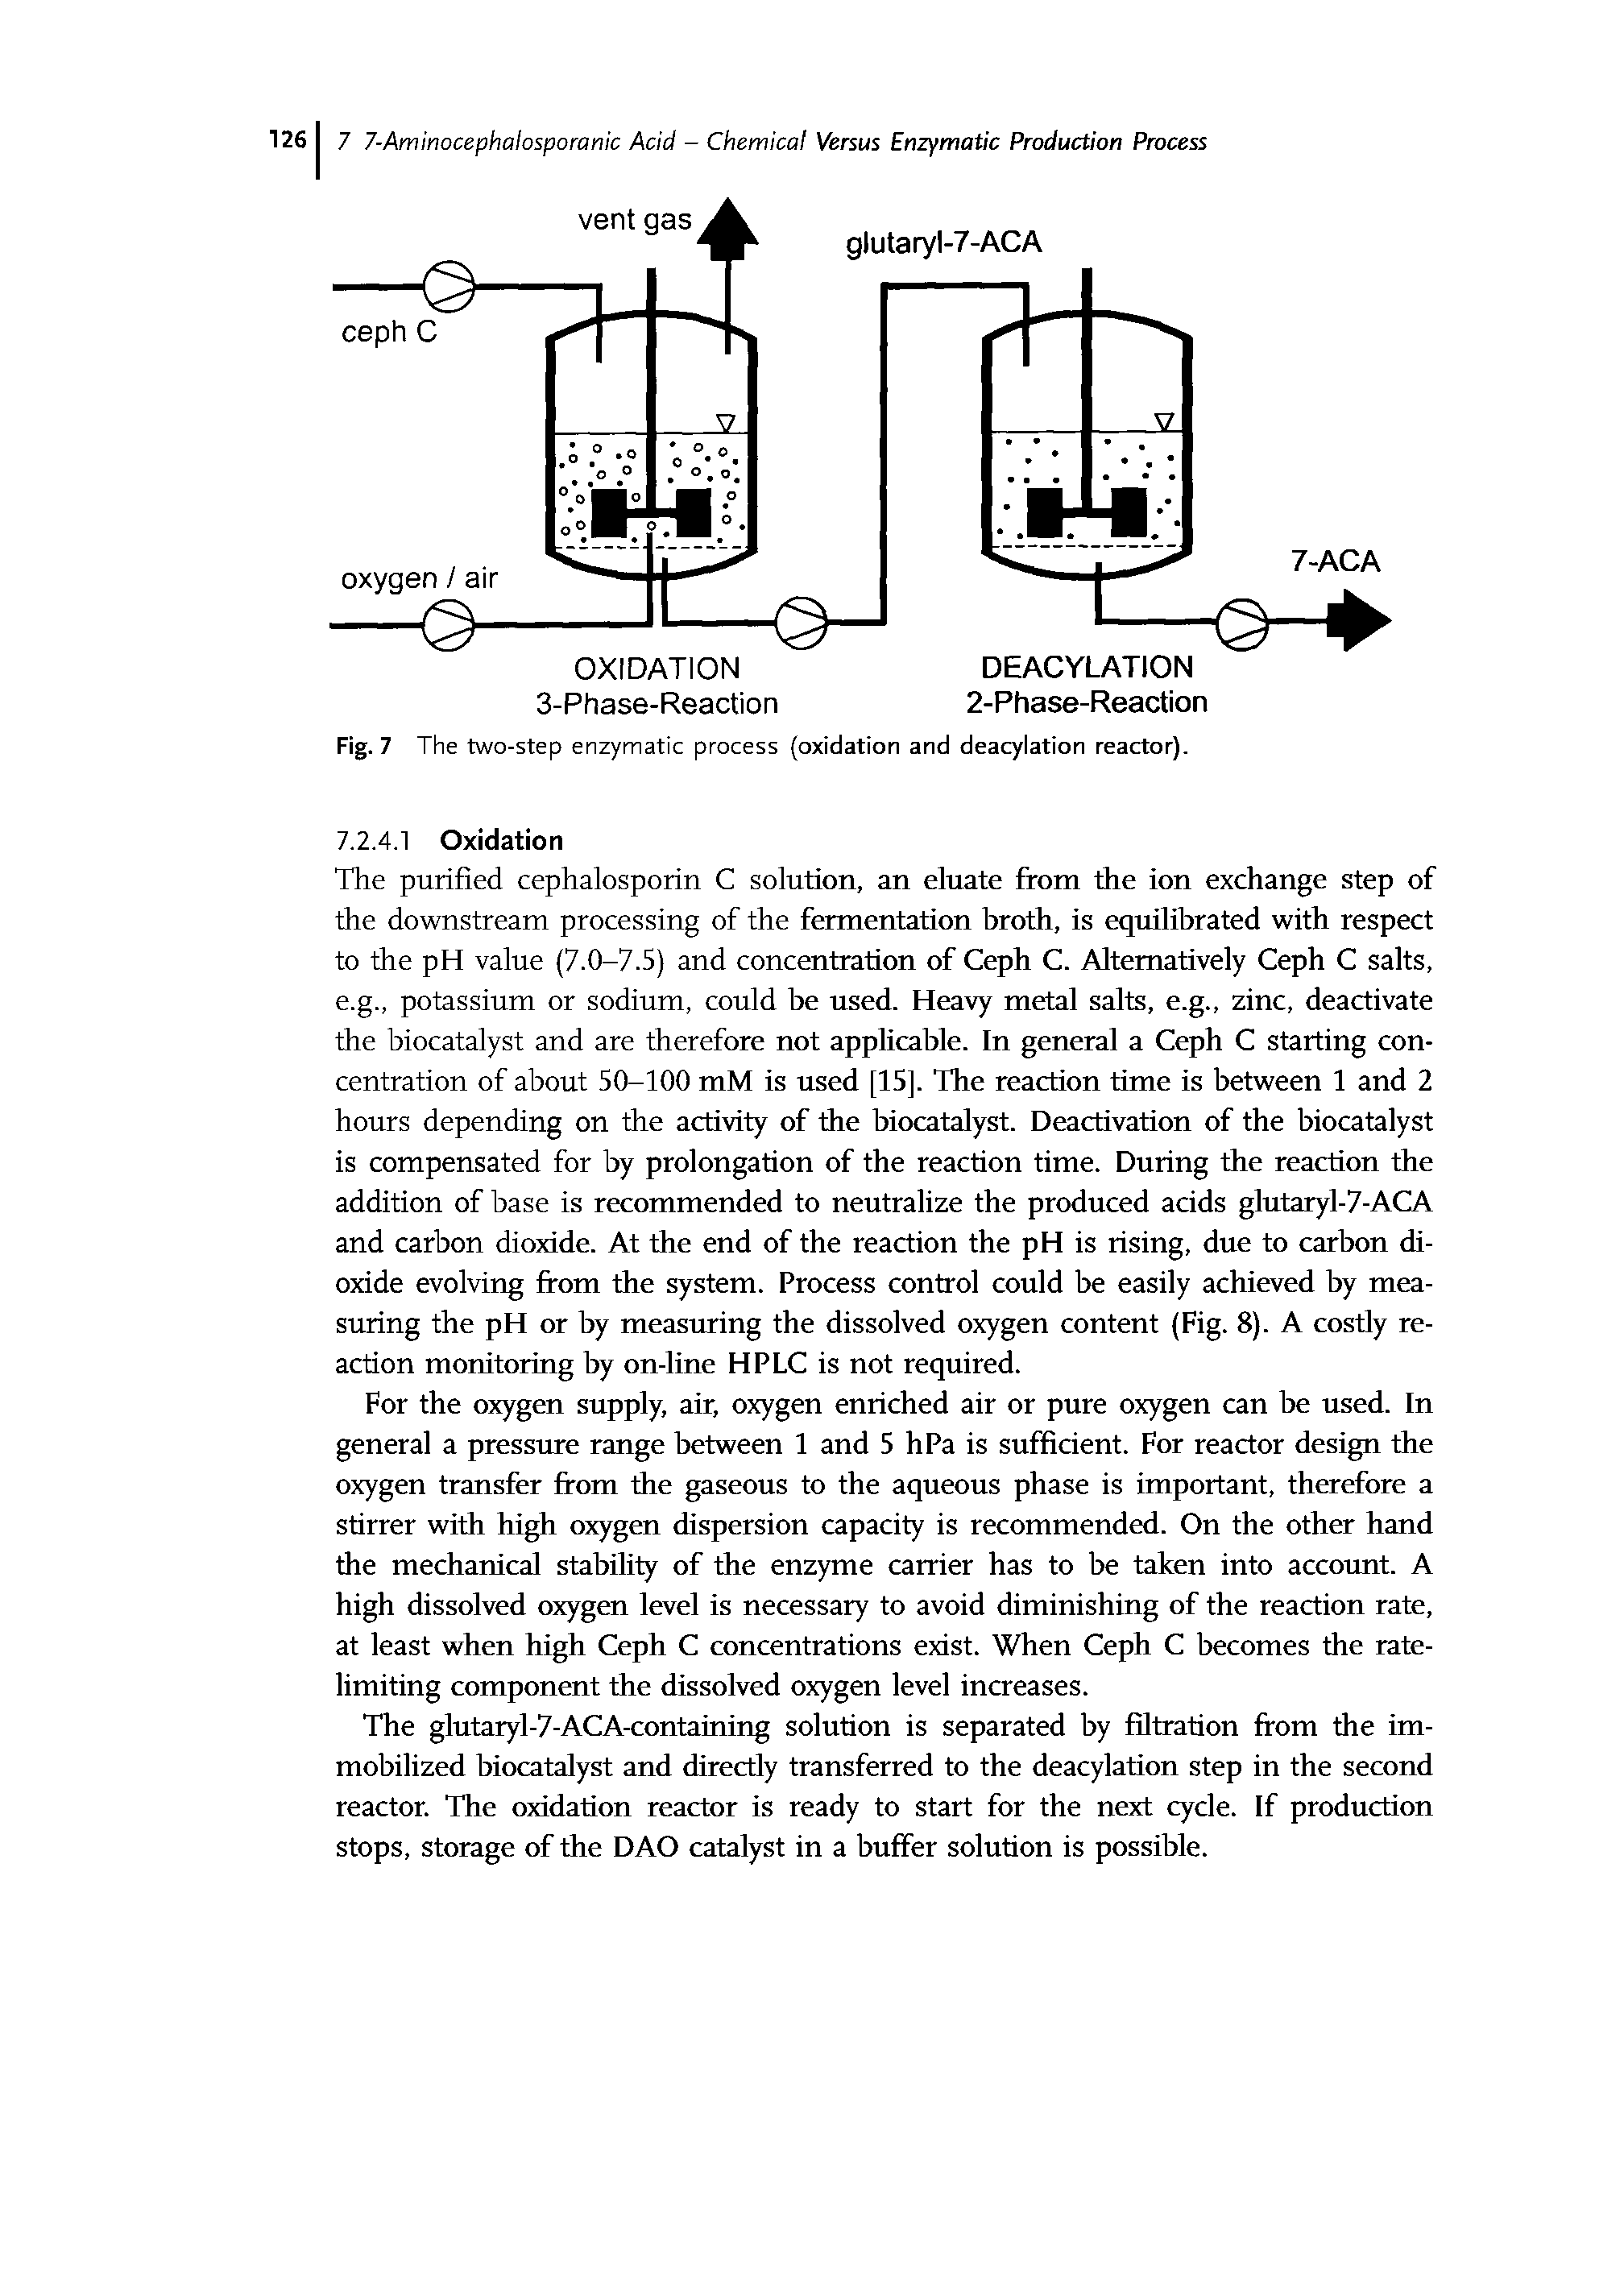 Fig. 7 The two-step enzymatic process (oxidation and deacylation reactor).